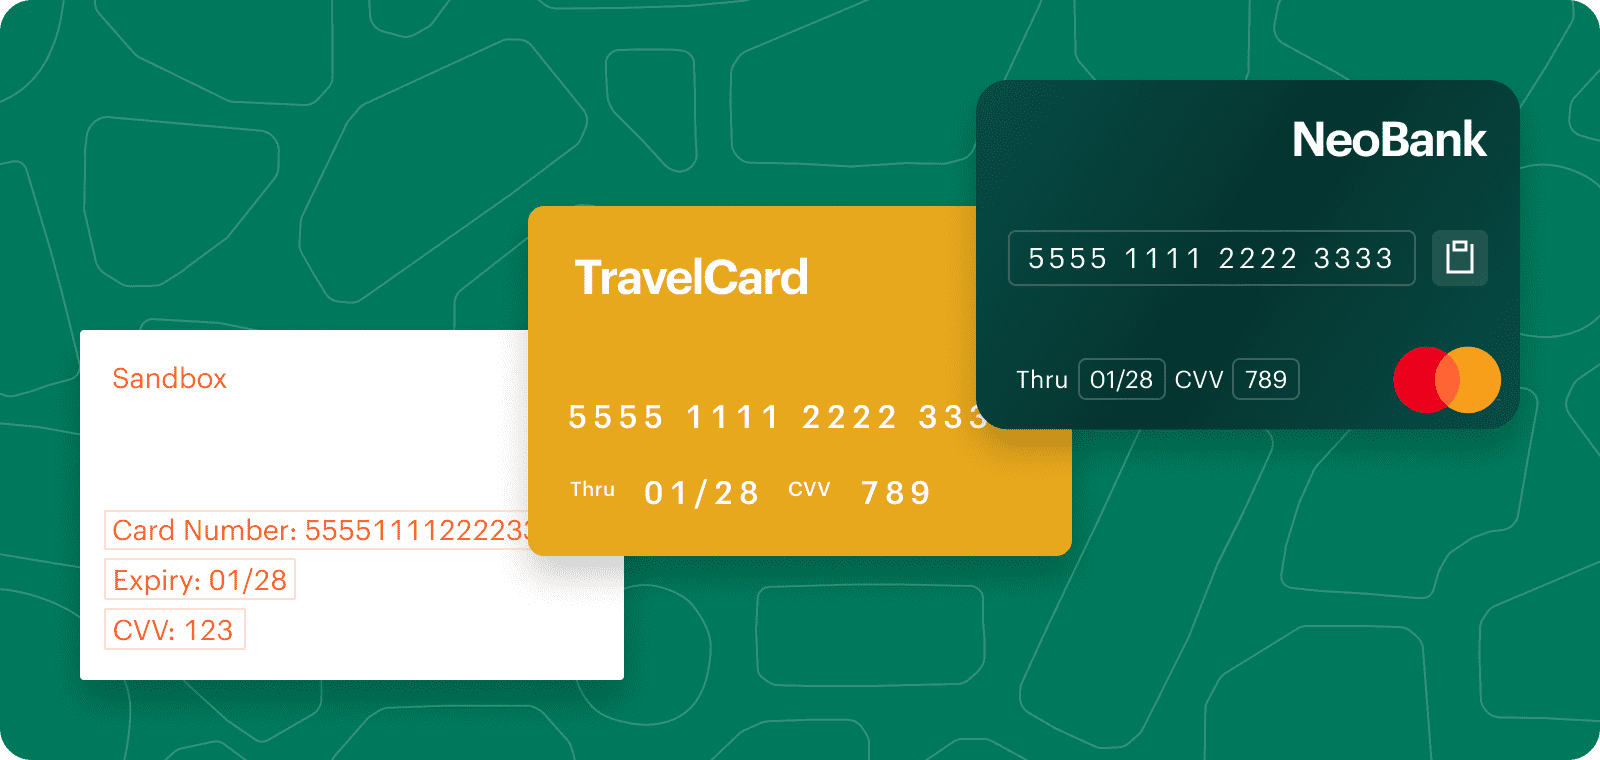 Examples of our customizable card UI